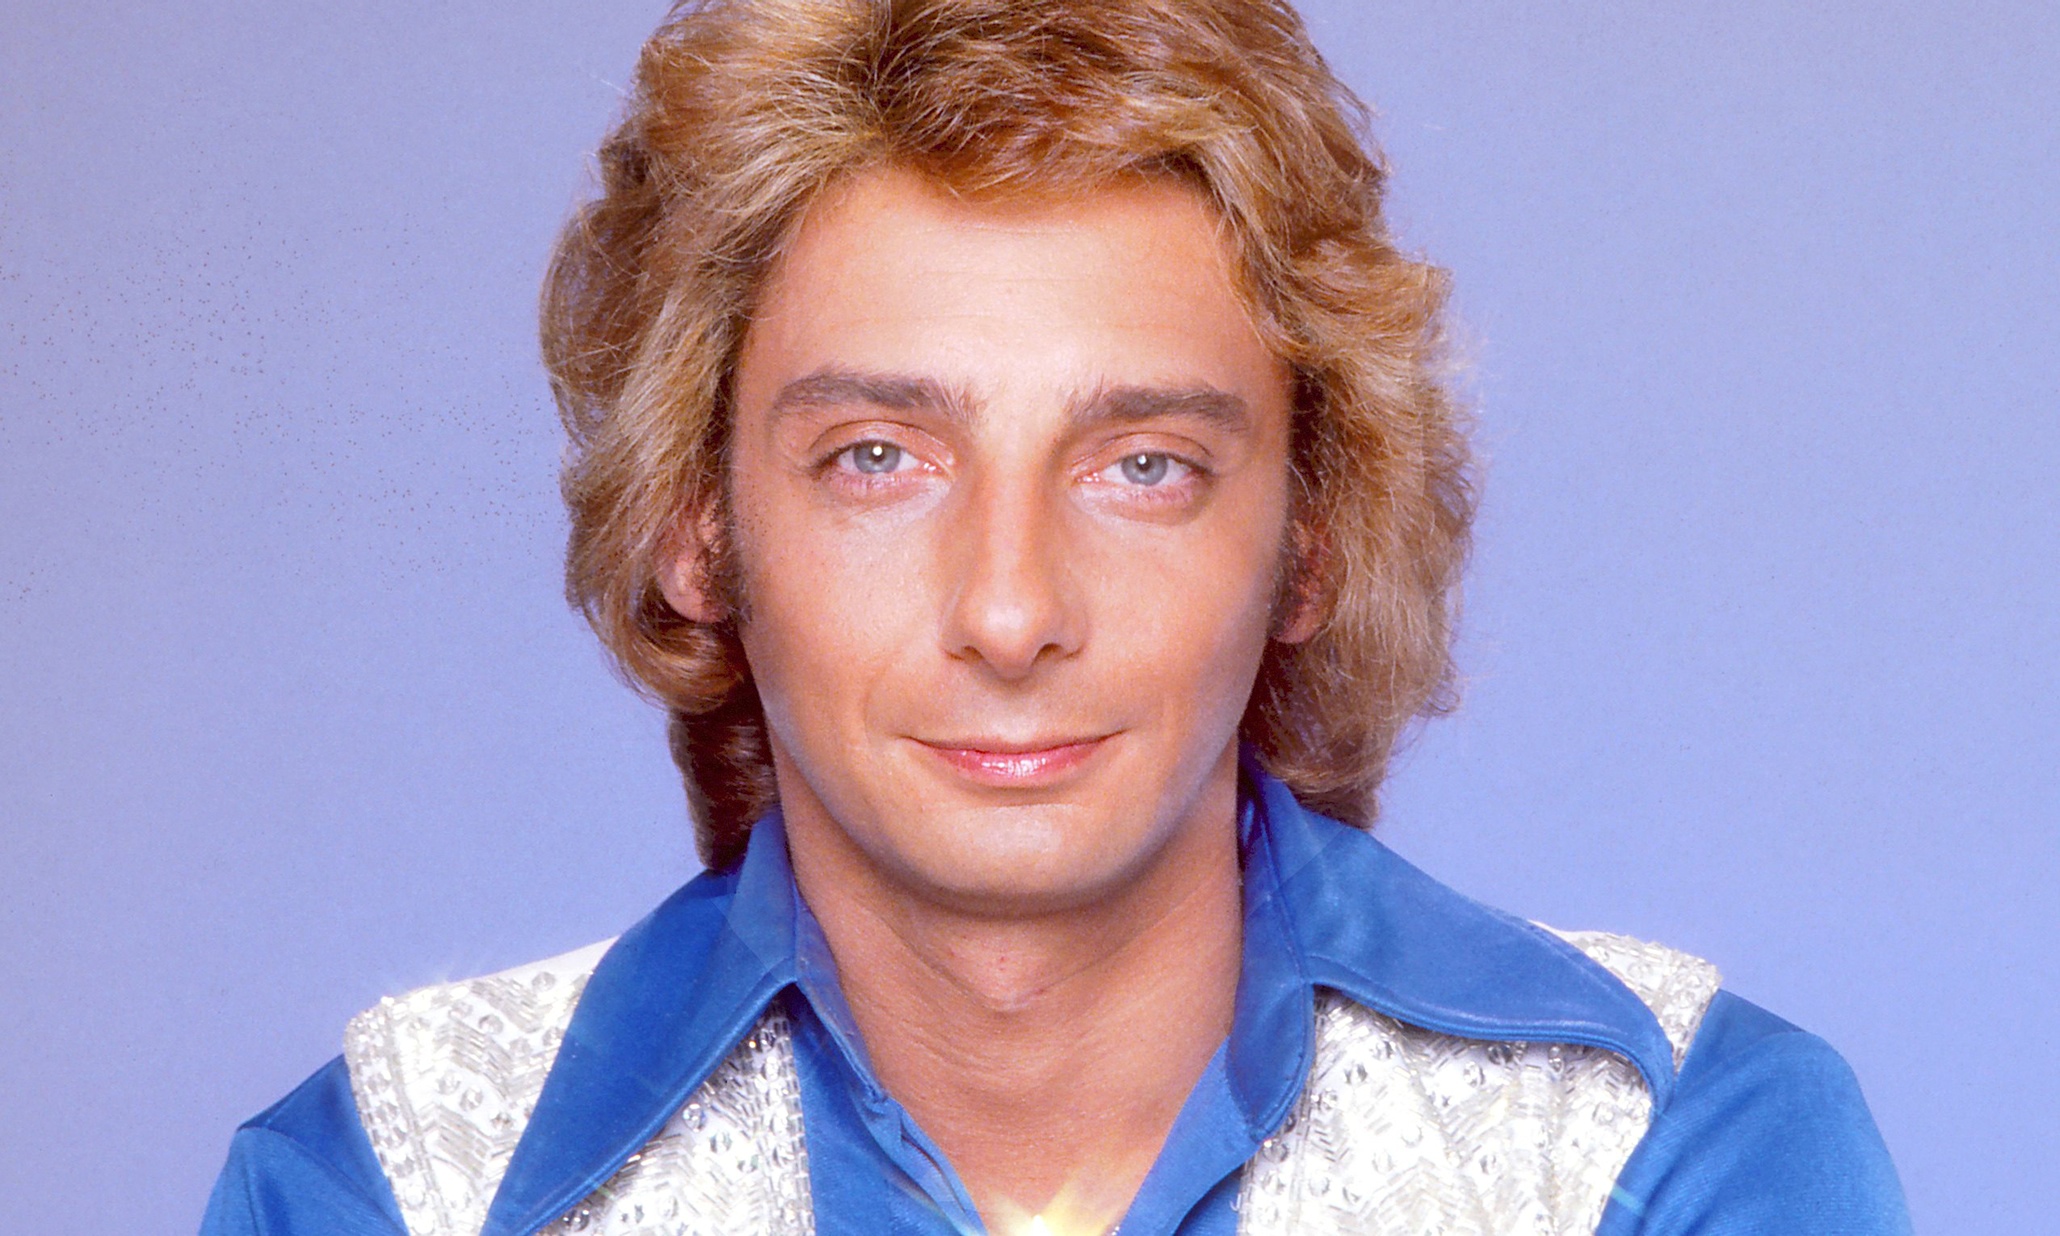 Barry Manilow #1